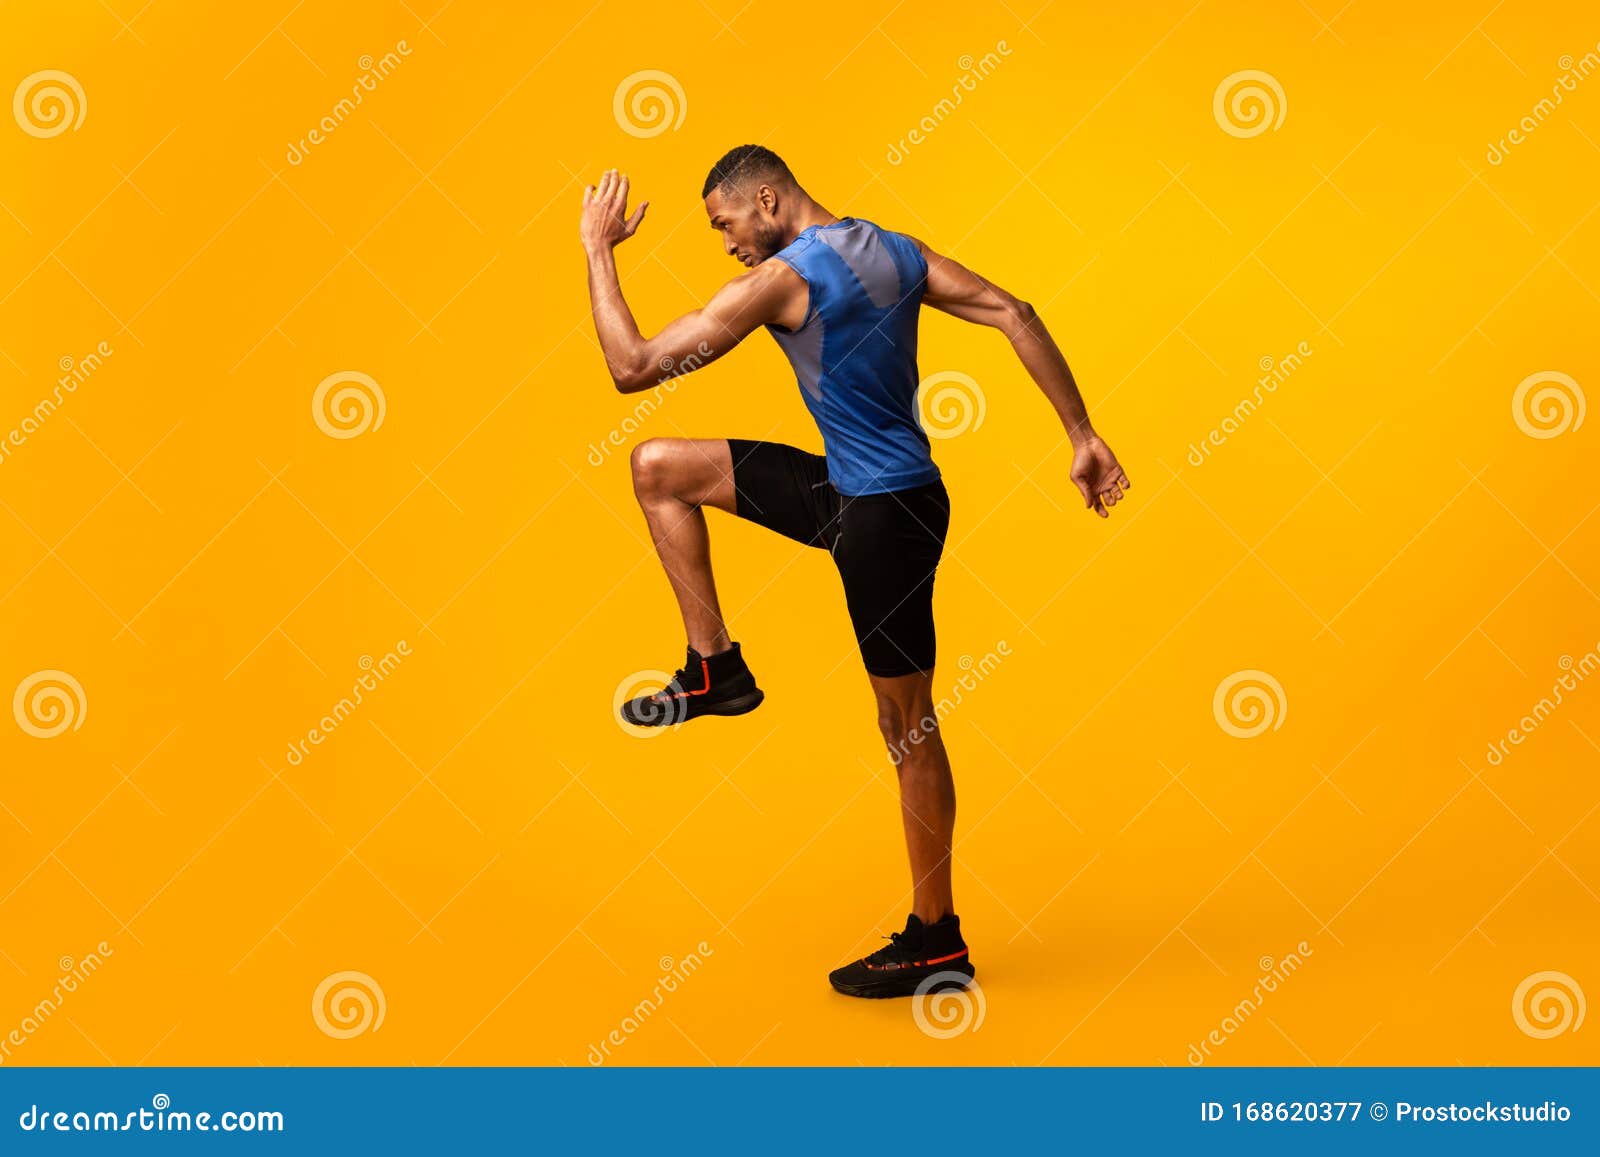 young black sportsman walks highly lifting knees